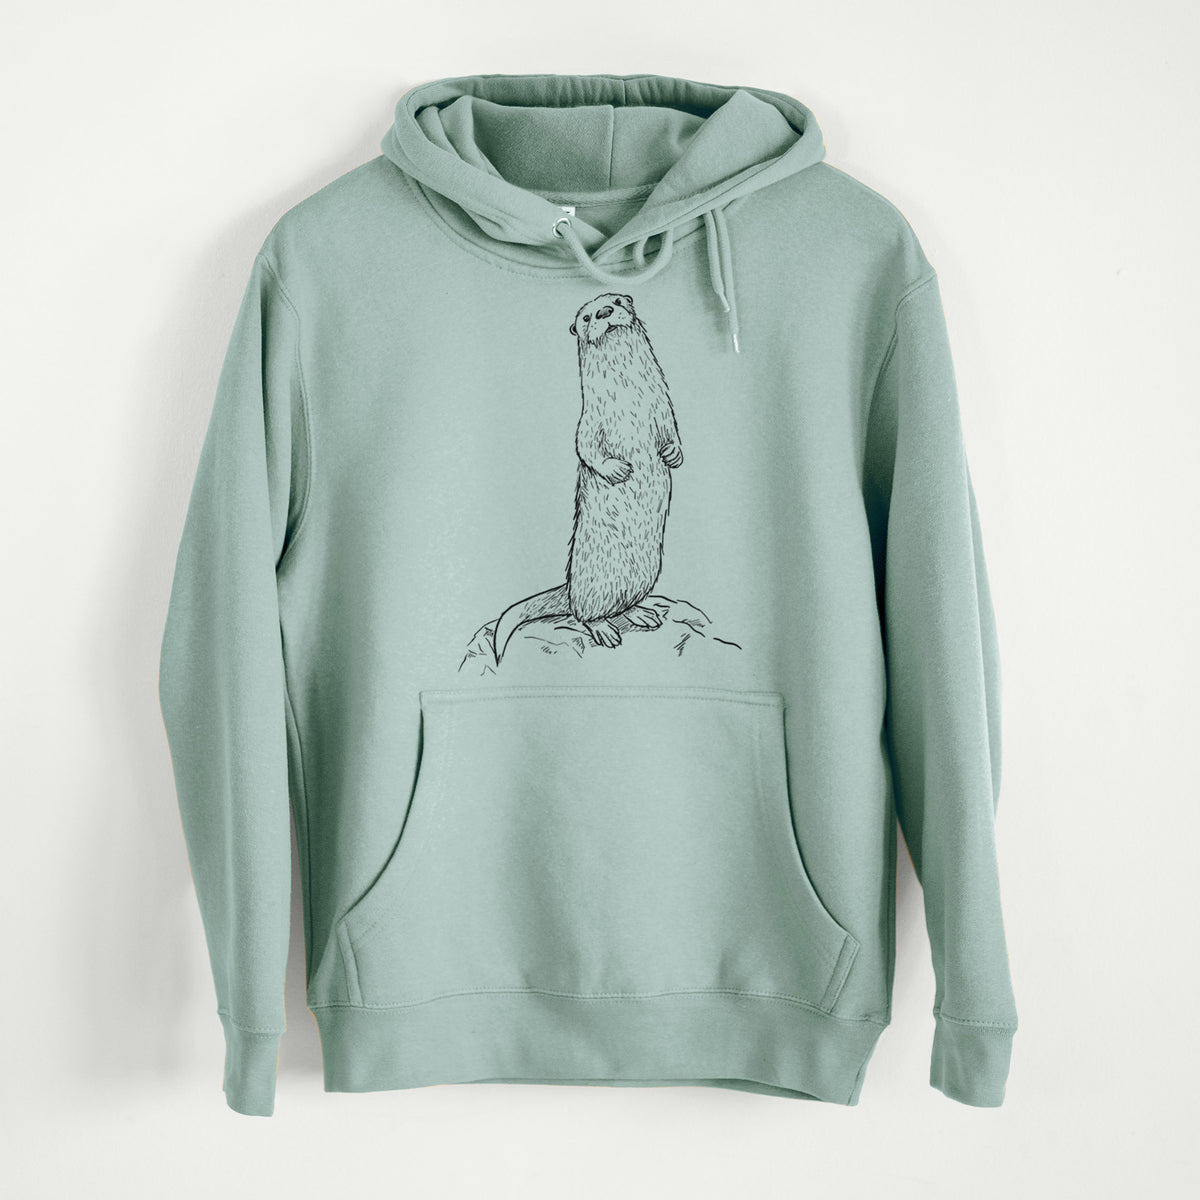 North American River Otter - Lontra canadensis  - Mid-Weight Unisex Premium Blend Hoodie